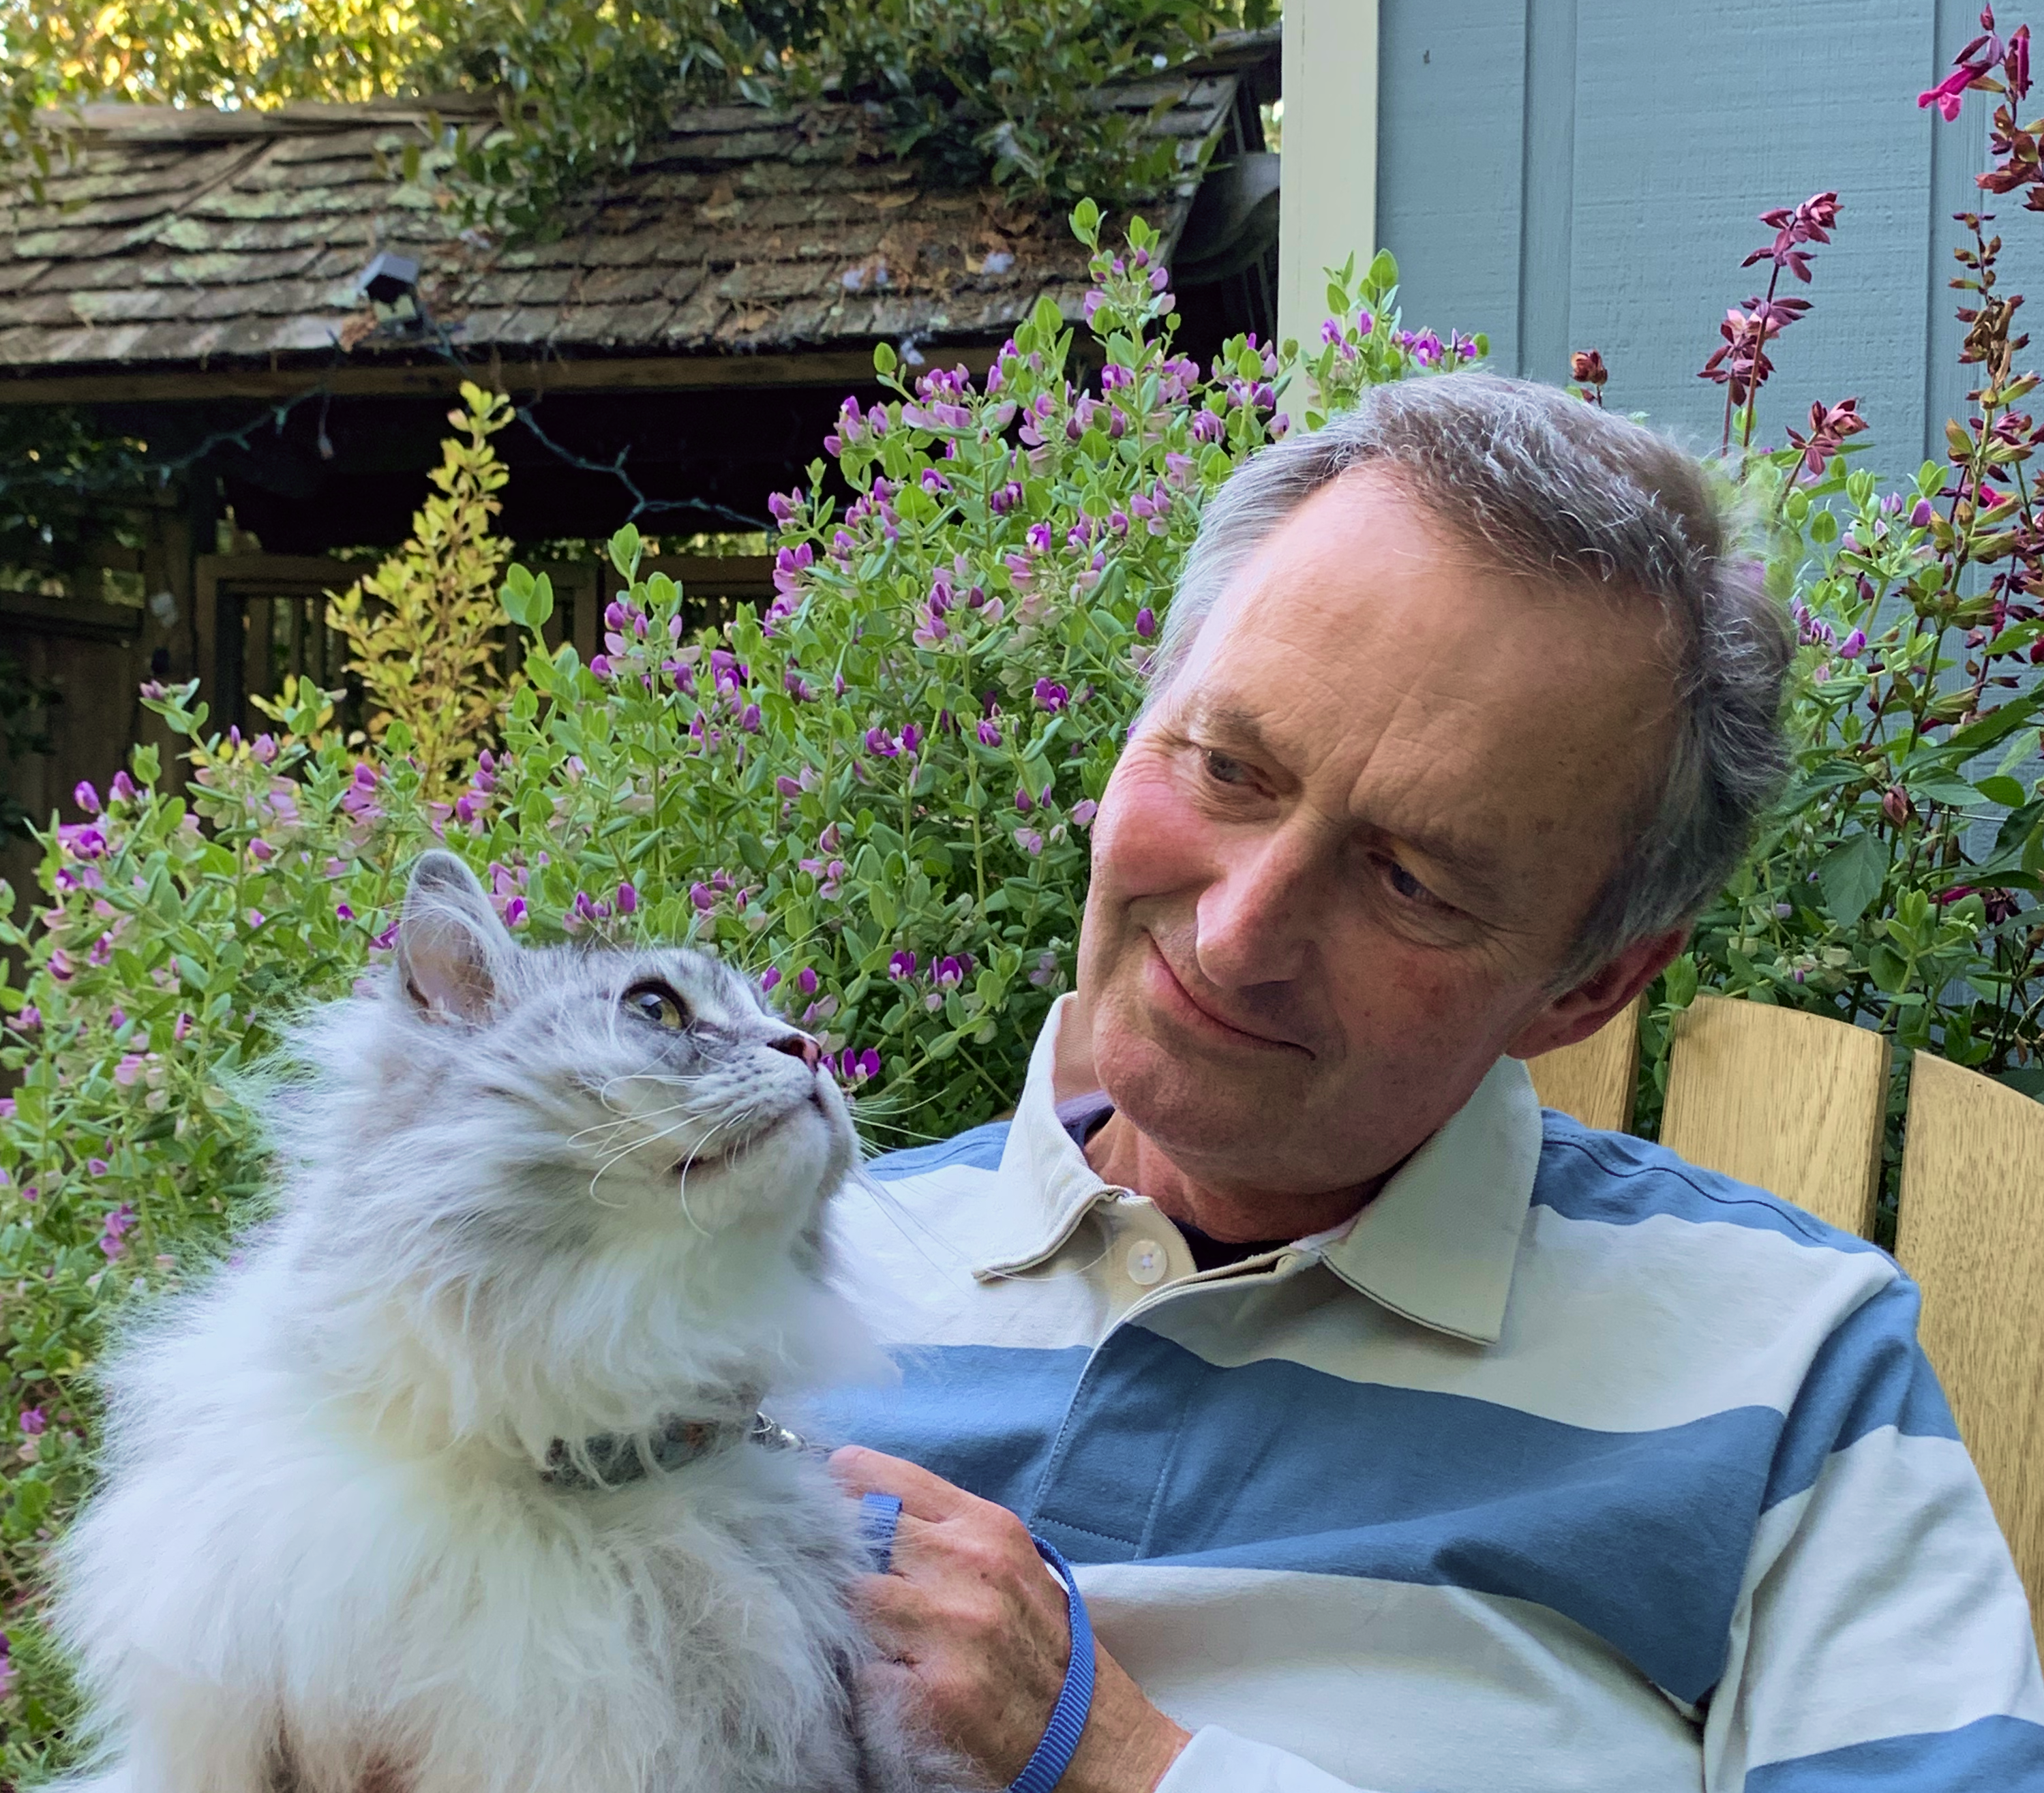 Dr. Noel Crymble sitting down, smiling, holding fluffy gray cat